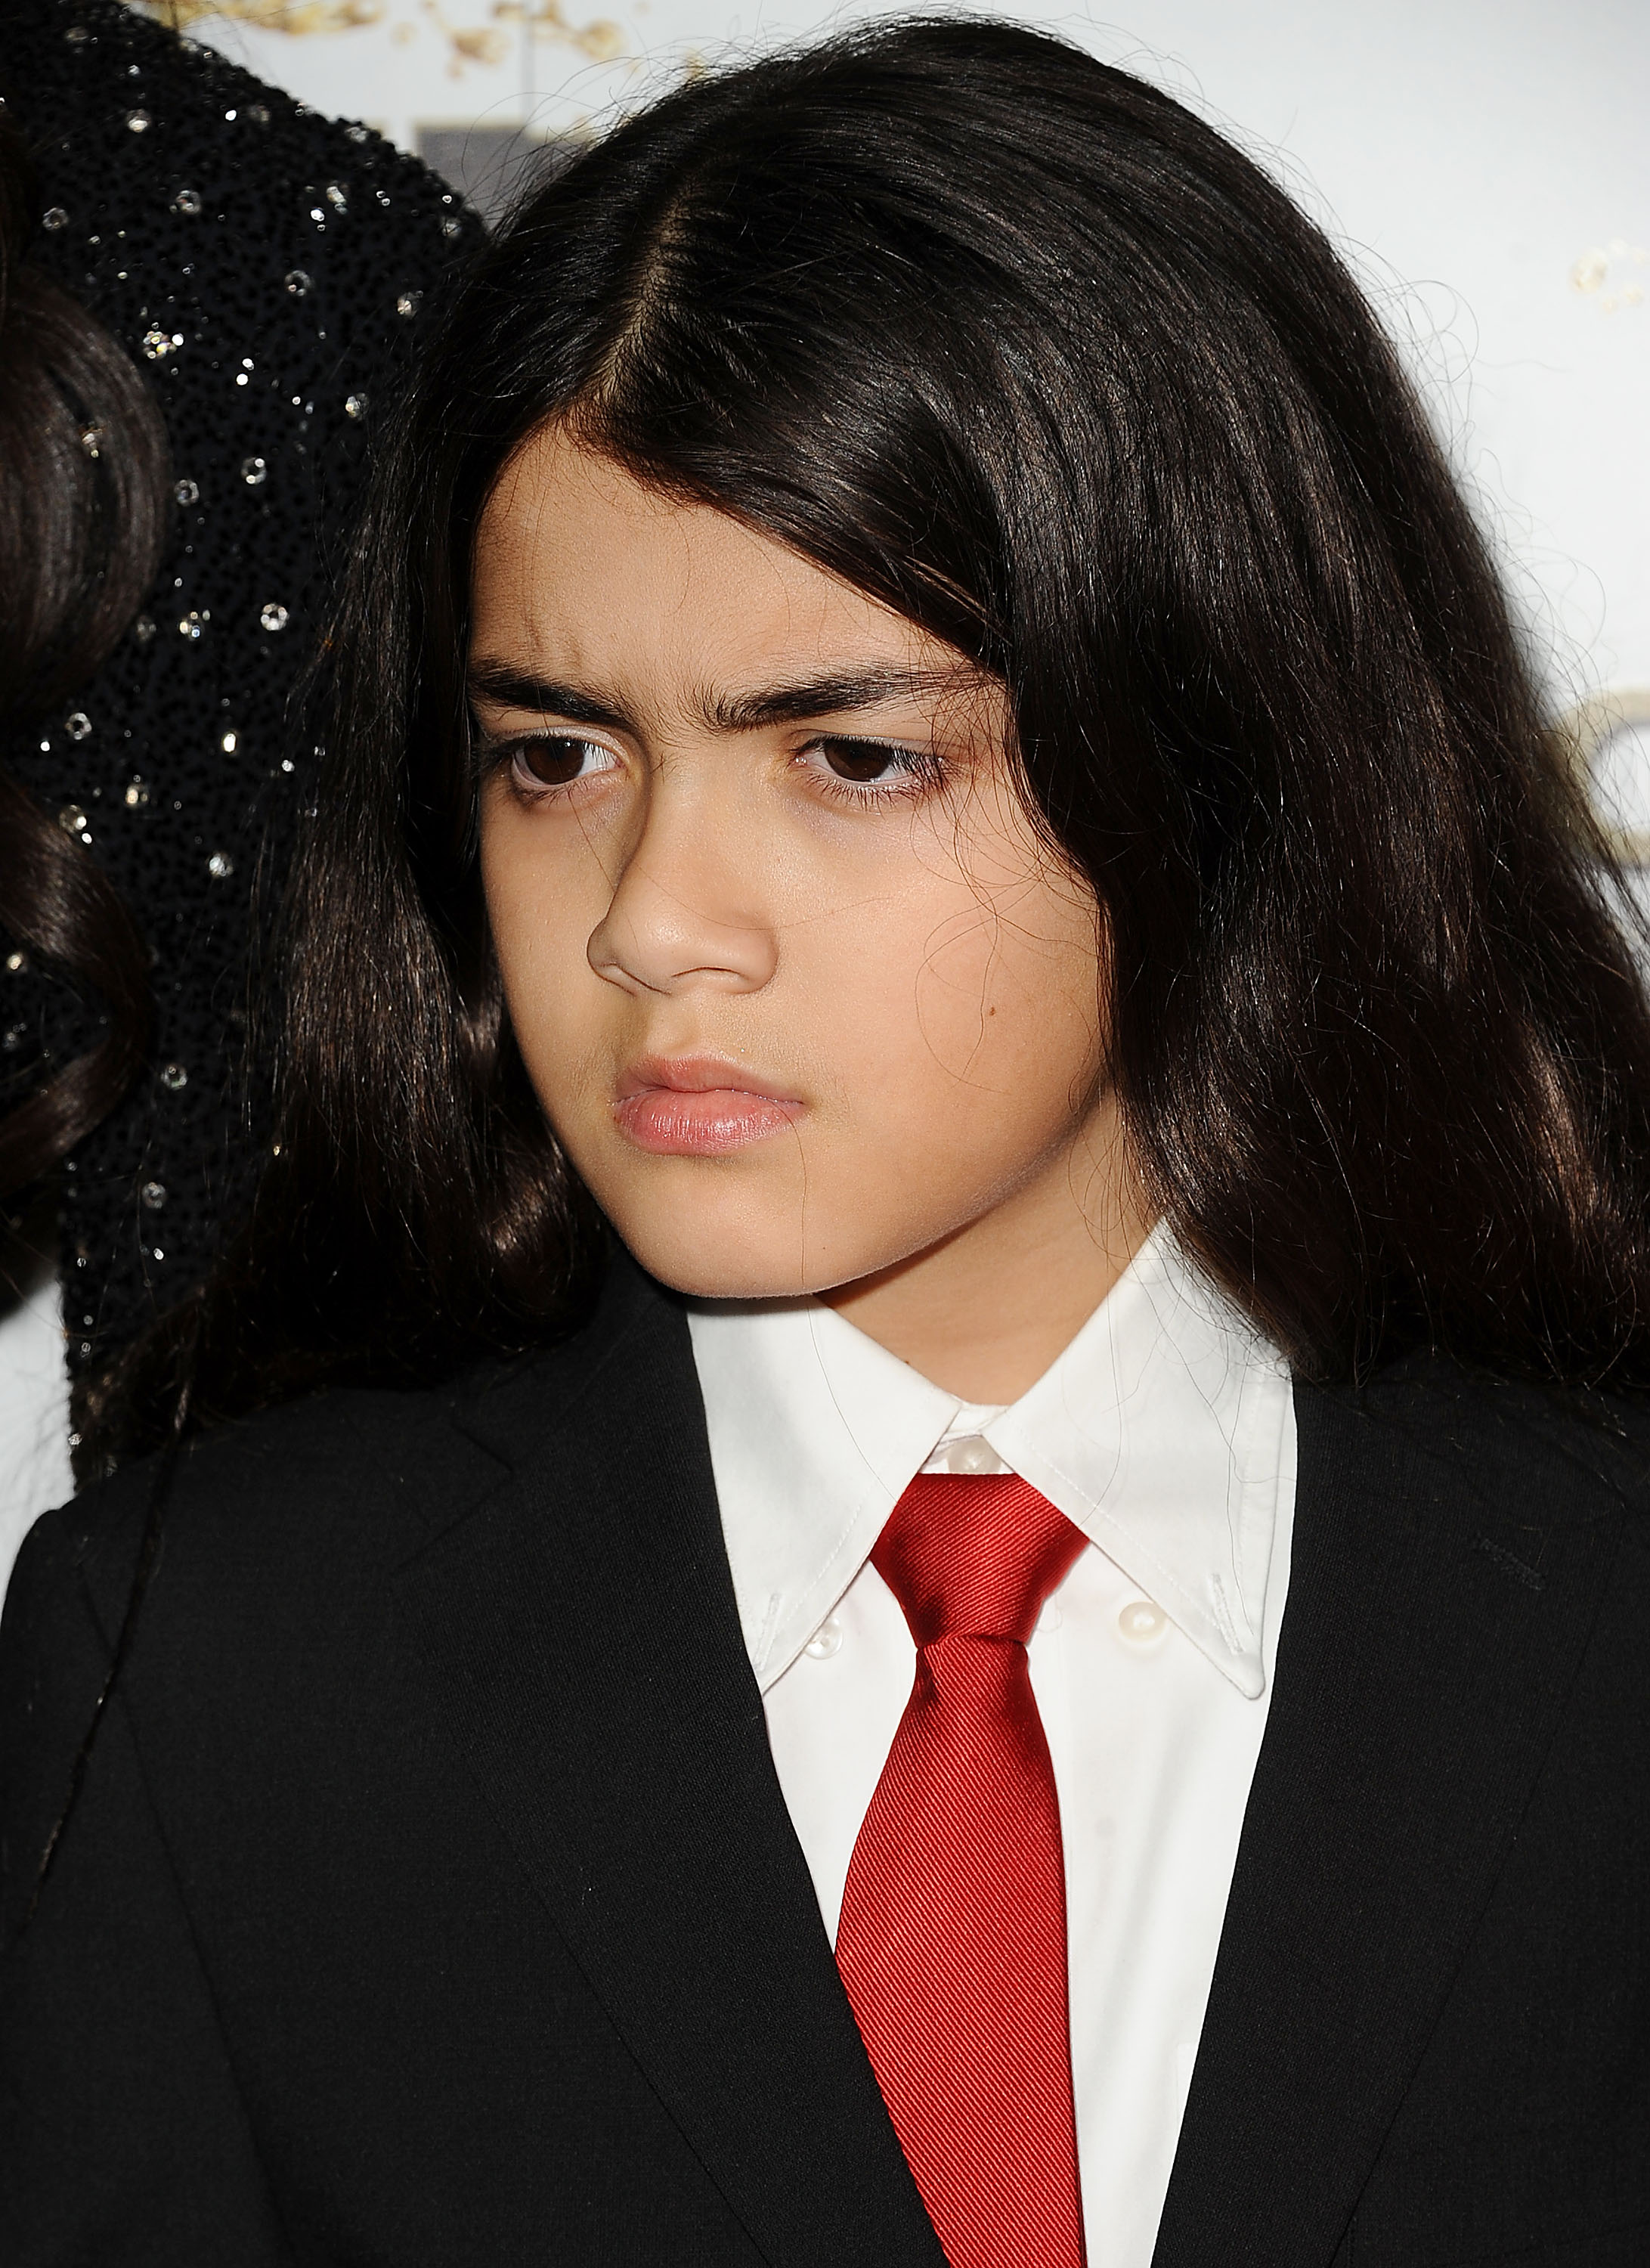 Blanket Jackson at the Mr. Pink Ginseng Drink launch party in Beverly Hills, California on October 11, 2012 | Source: Getty Images